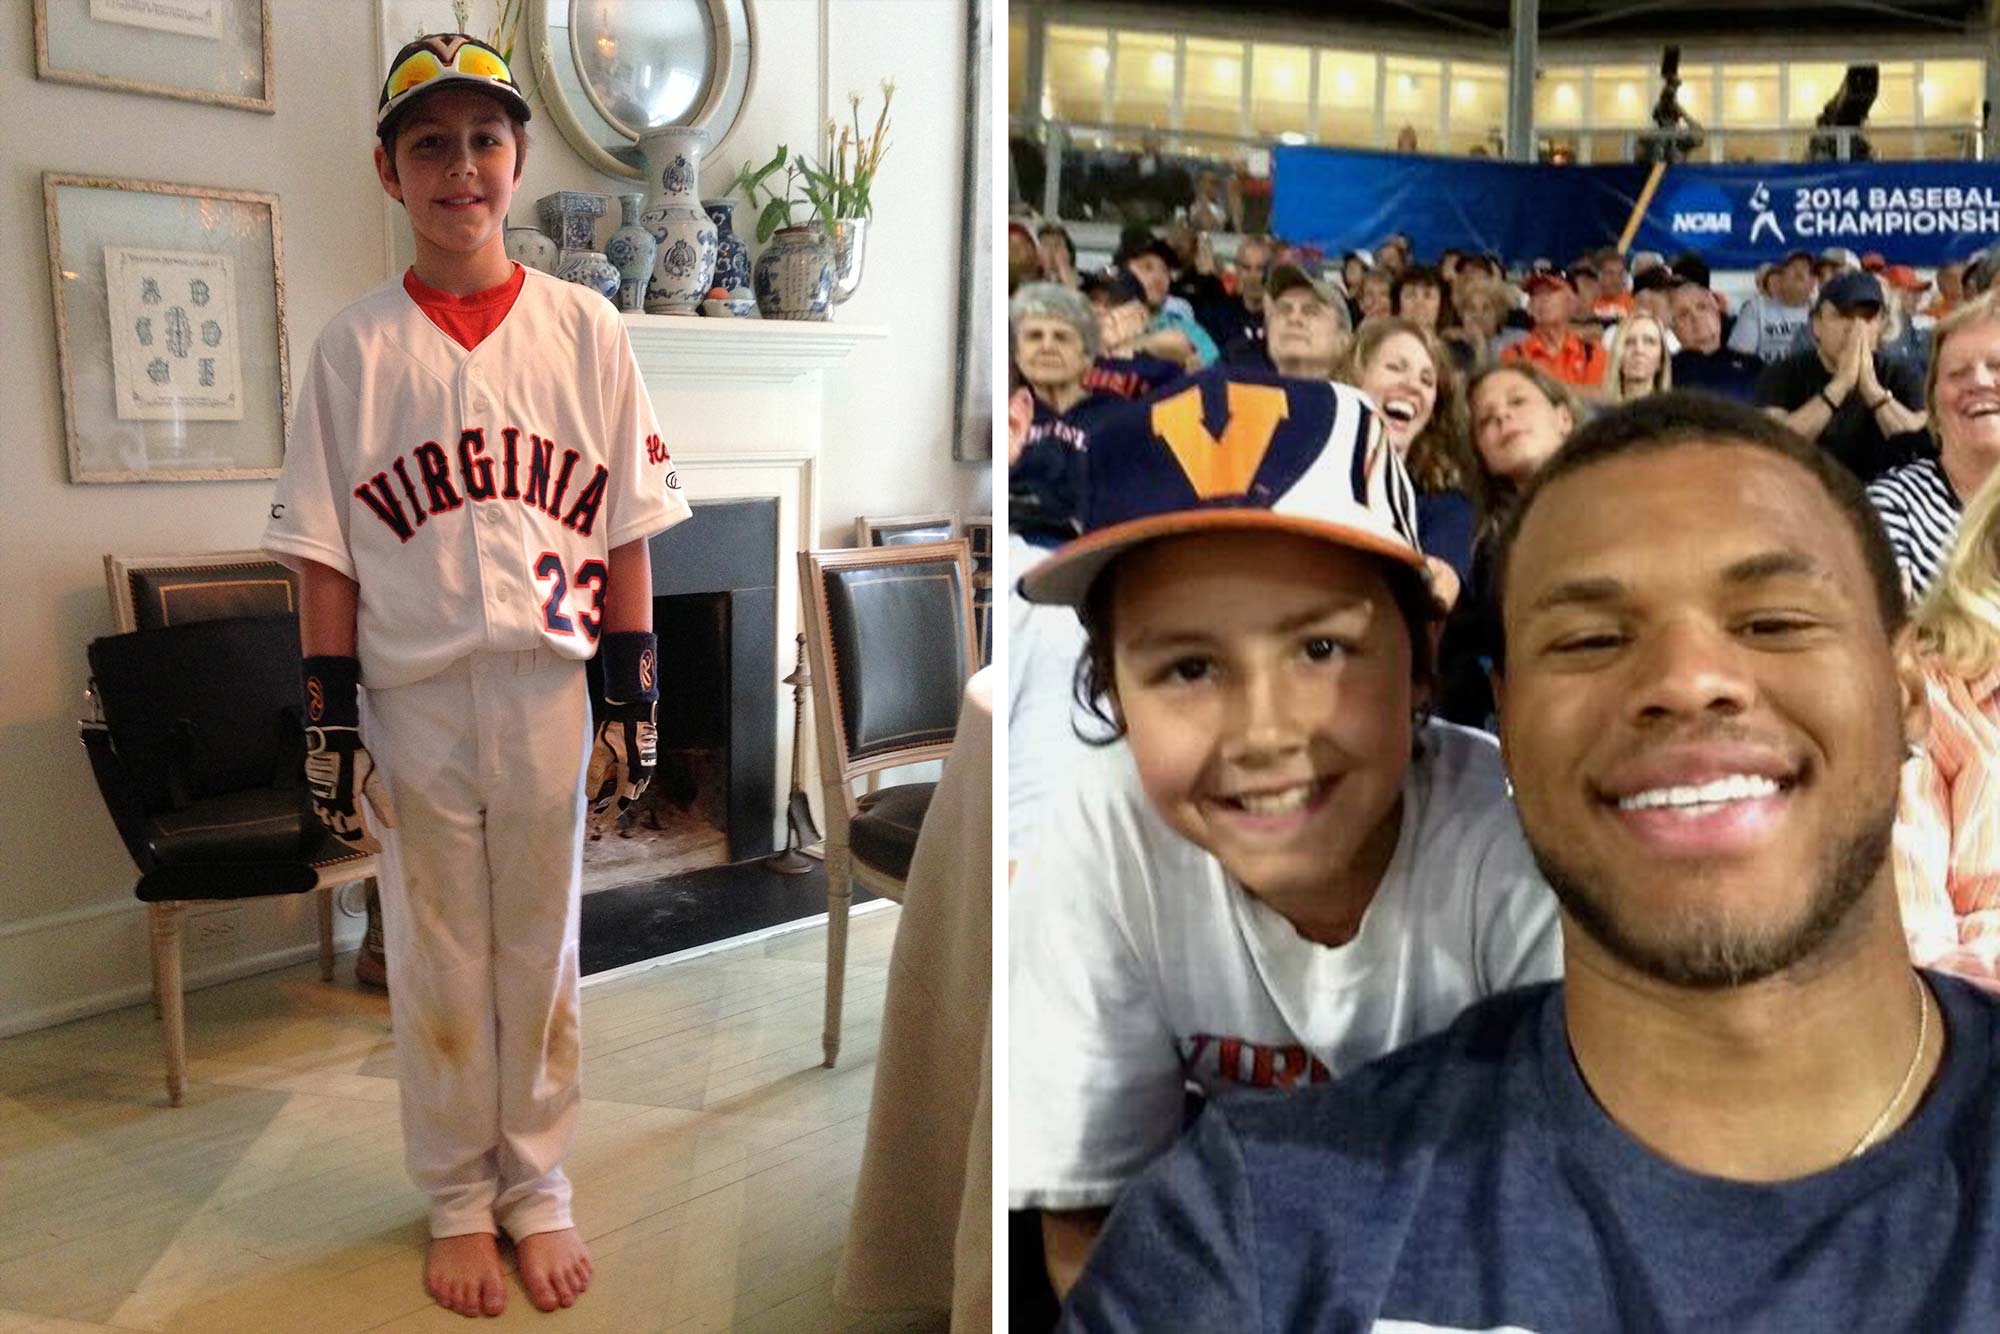 Two photos of Henry Ford as a child wearing UVA gear.